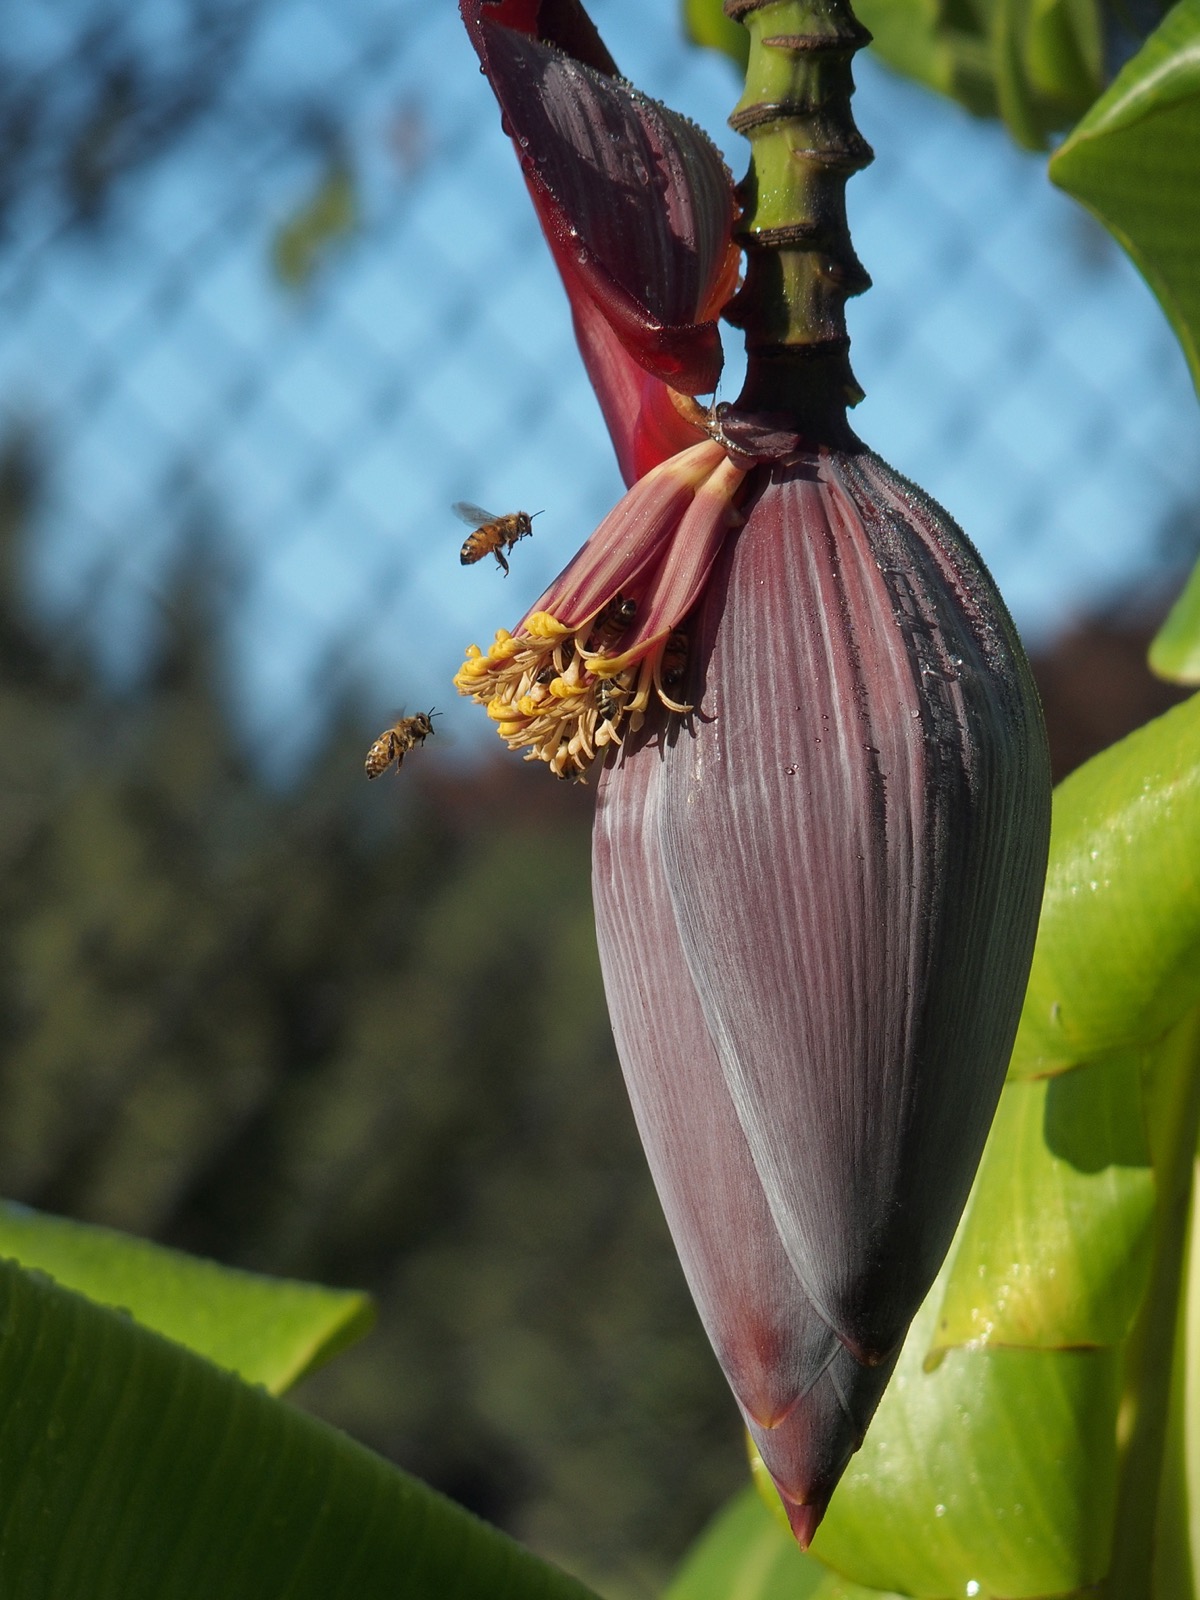 Two bees in flight polinating a large banana plant blossom.